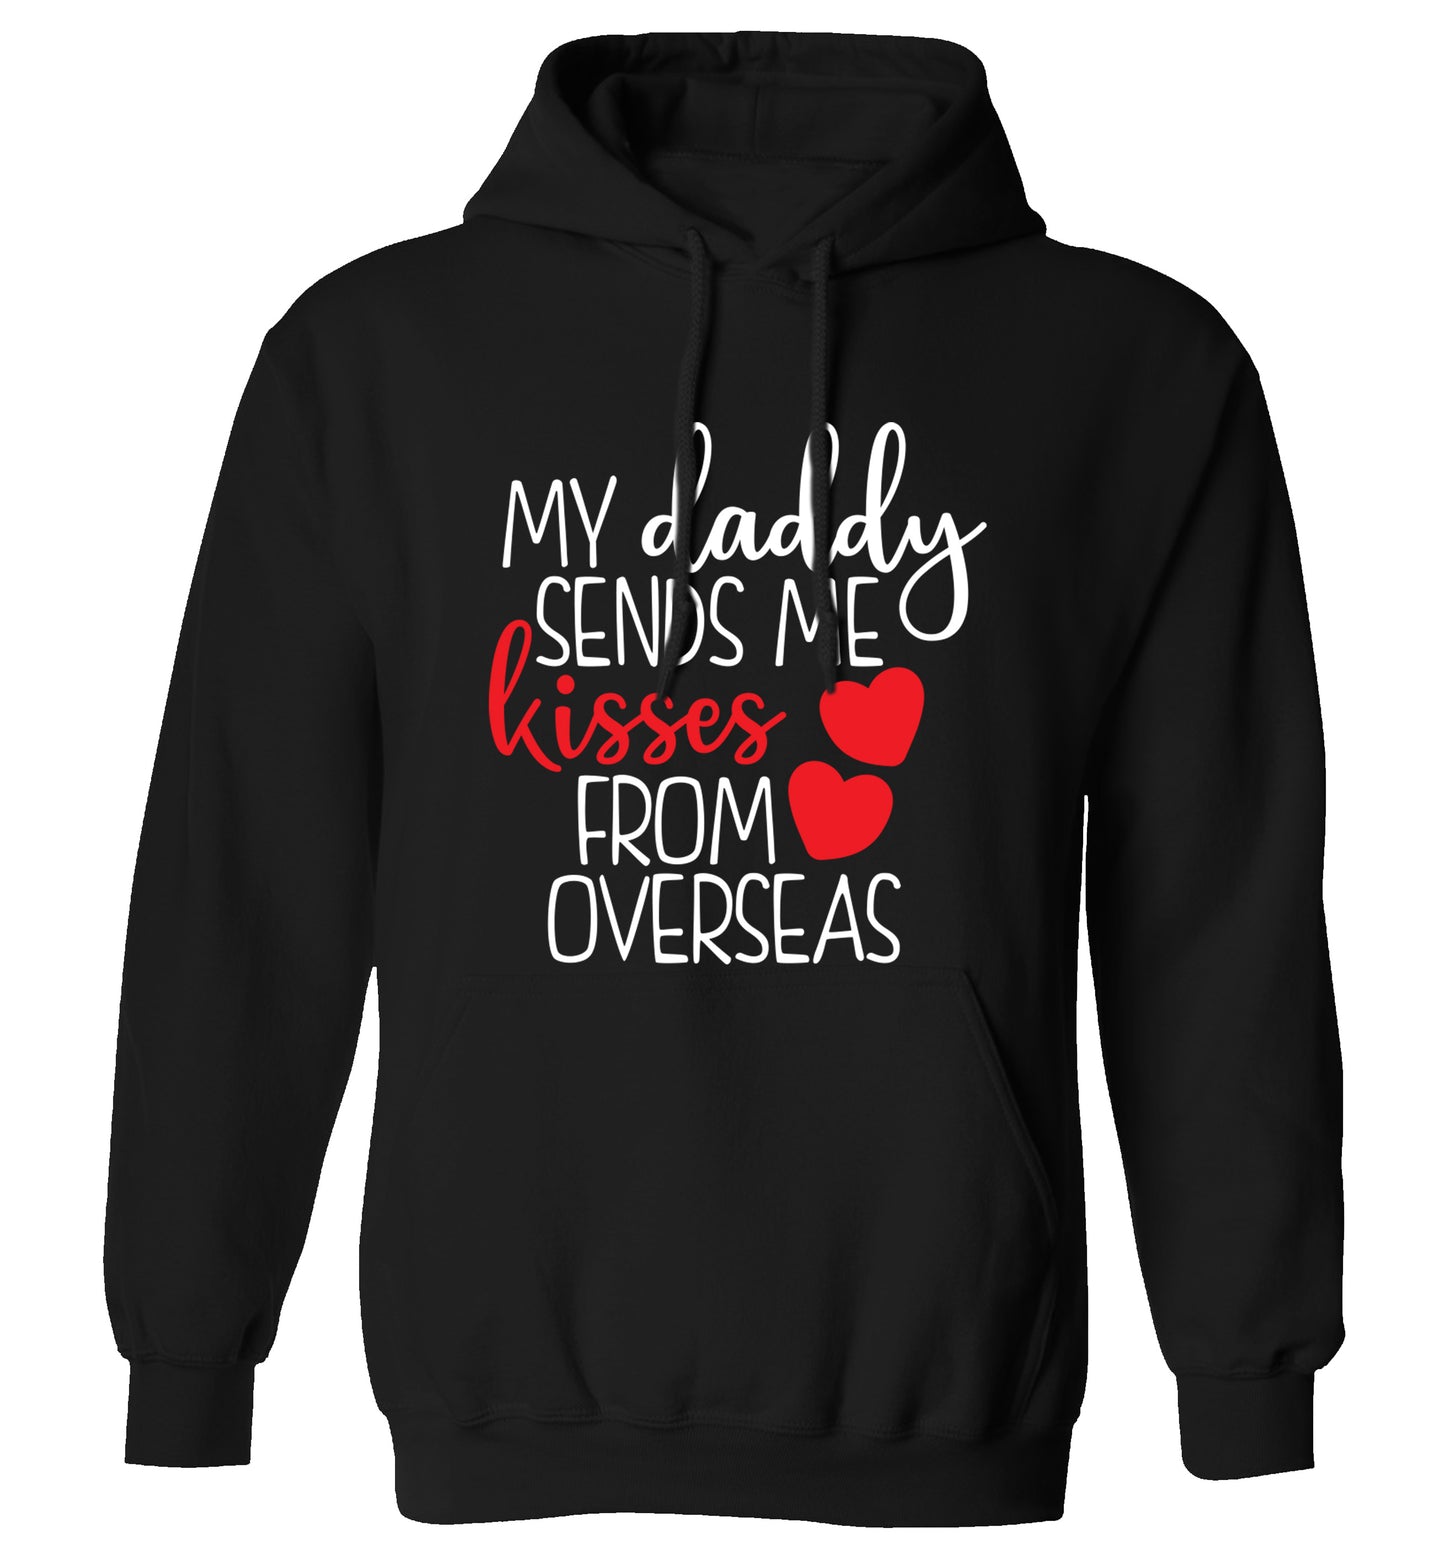 My daddy sends me kisses from overseas adults unisex black hoodie 2XL